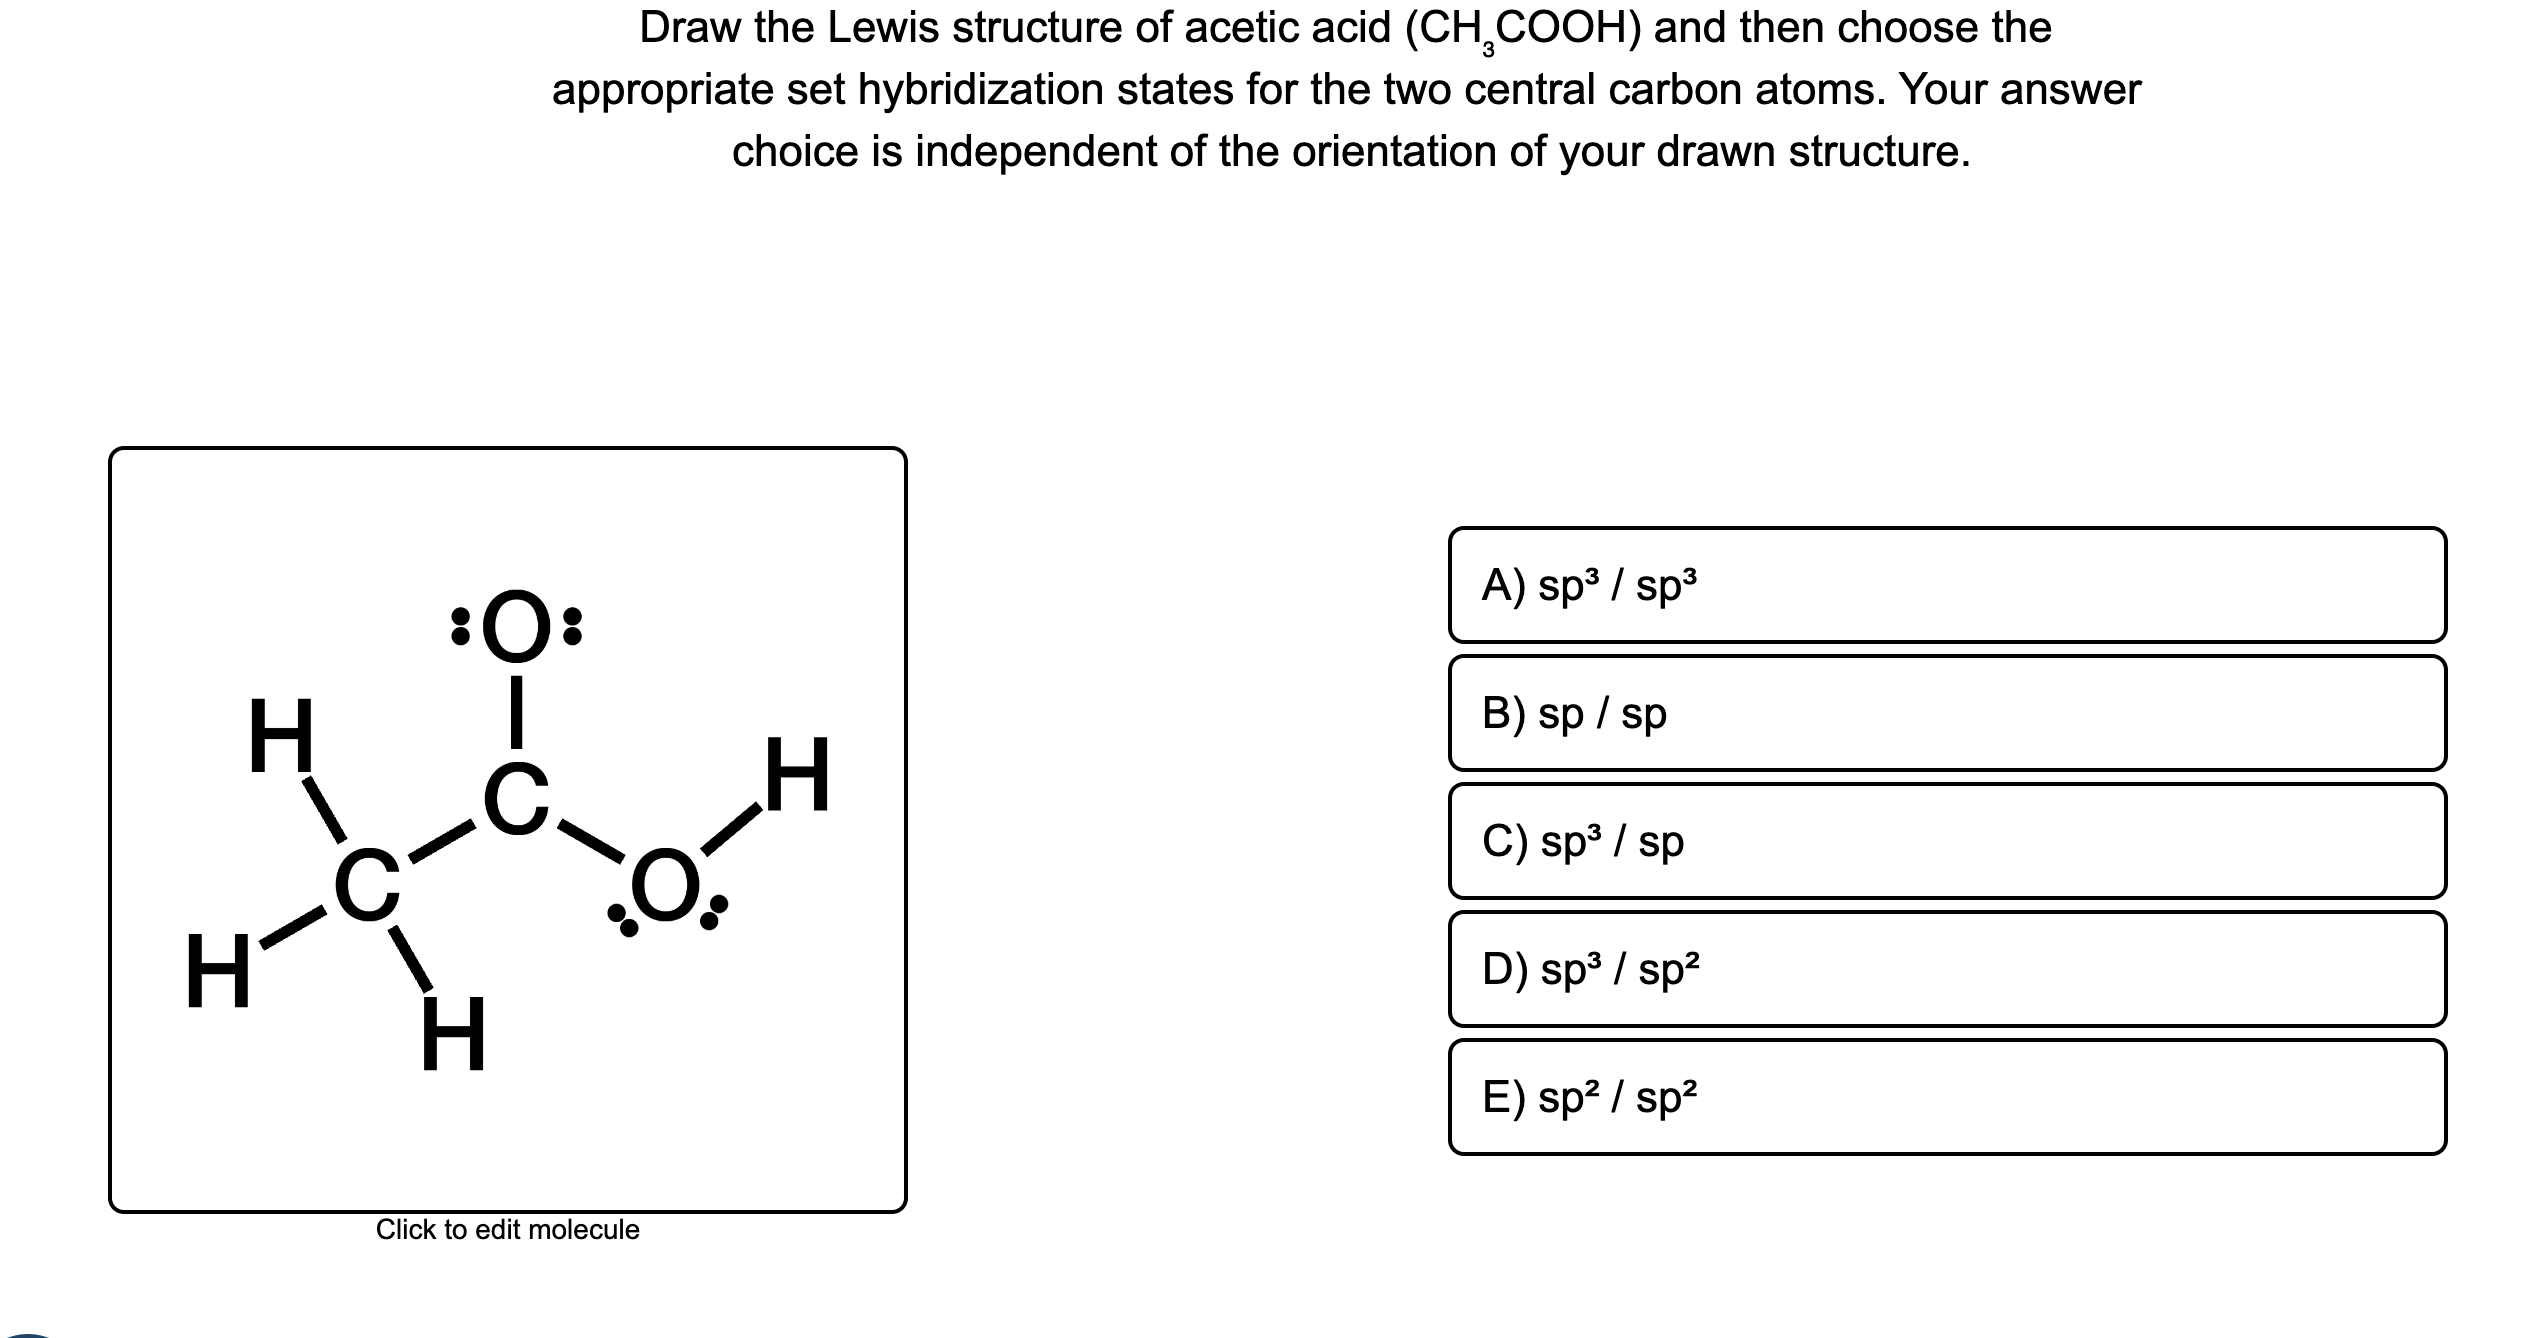 [Solved] Draw the Lewis structure of acetic acid (CH3COOH)